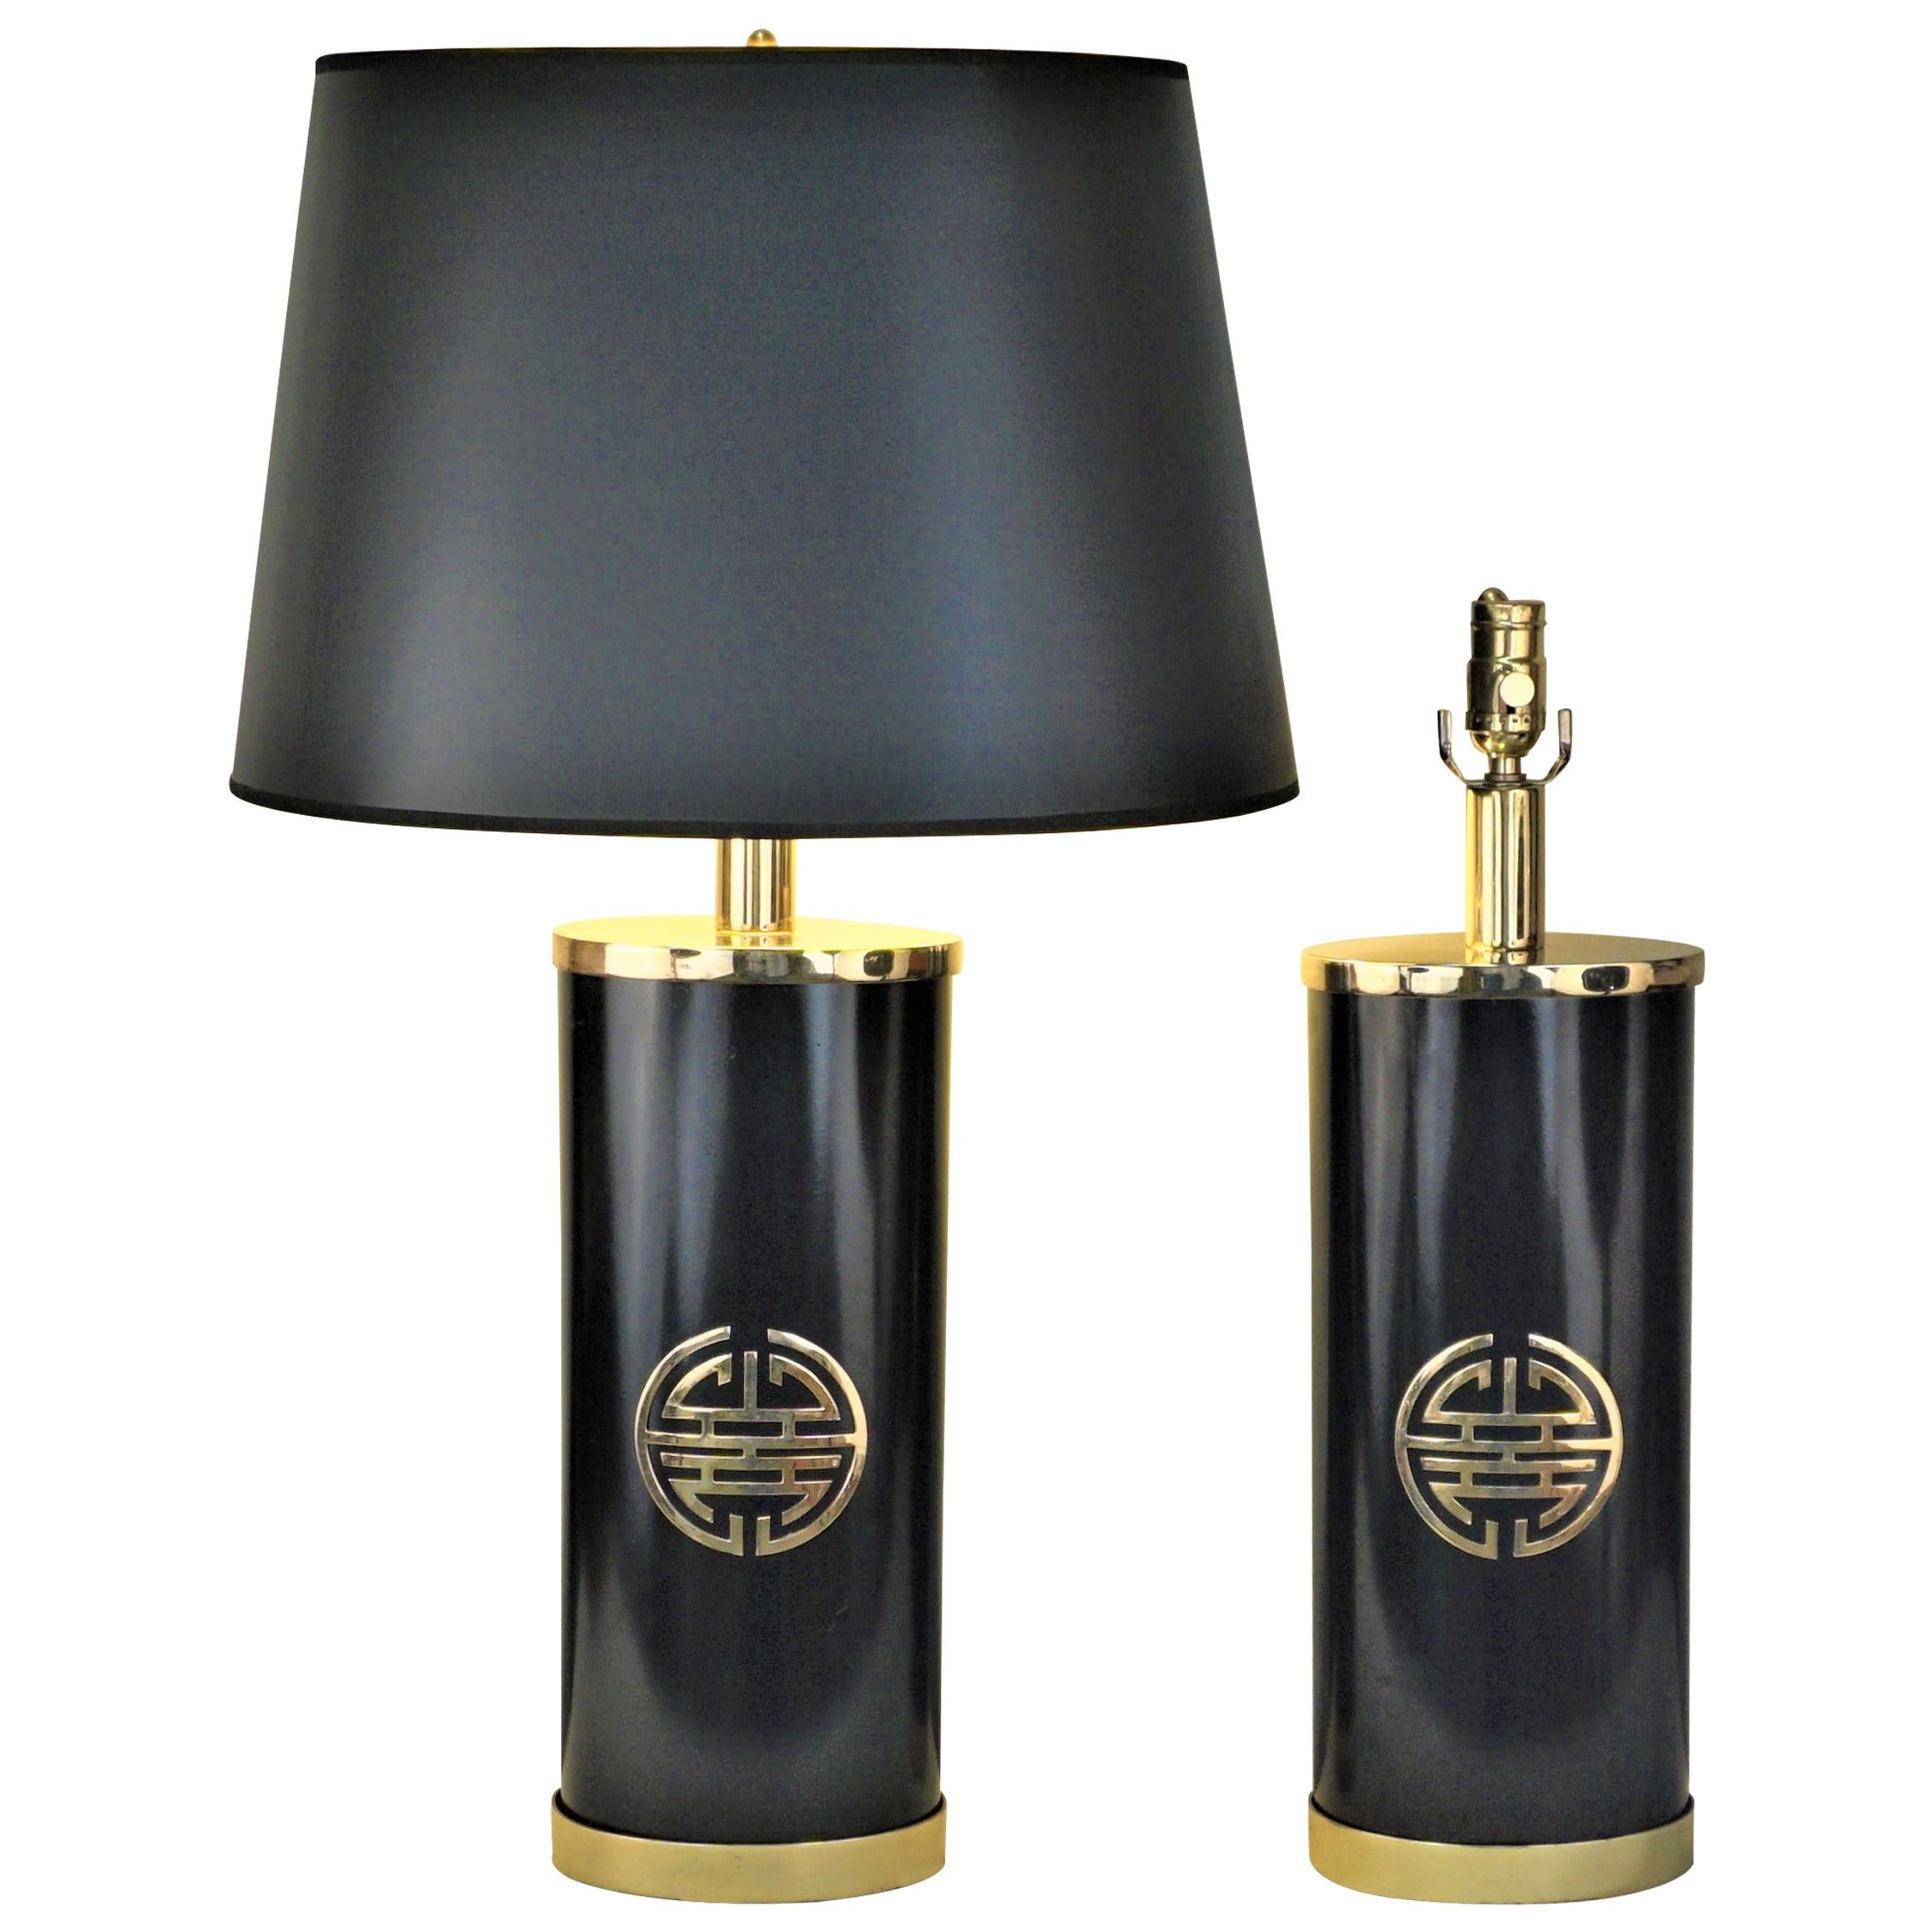 Pair of Lacquered Brass Table Lamps with Chinese Character